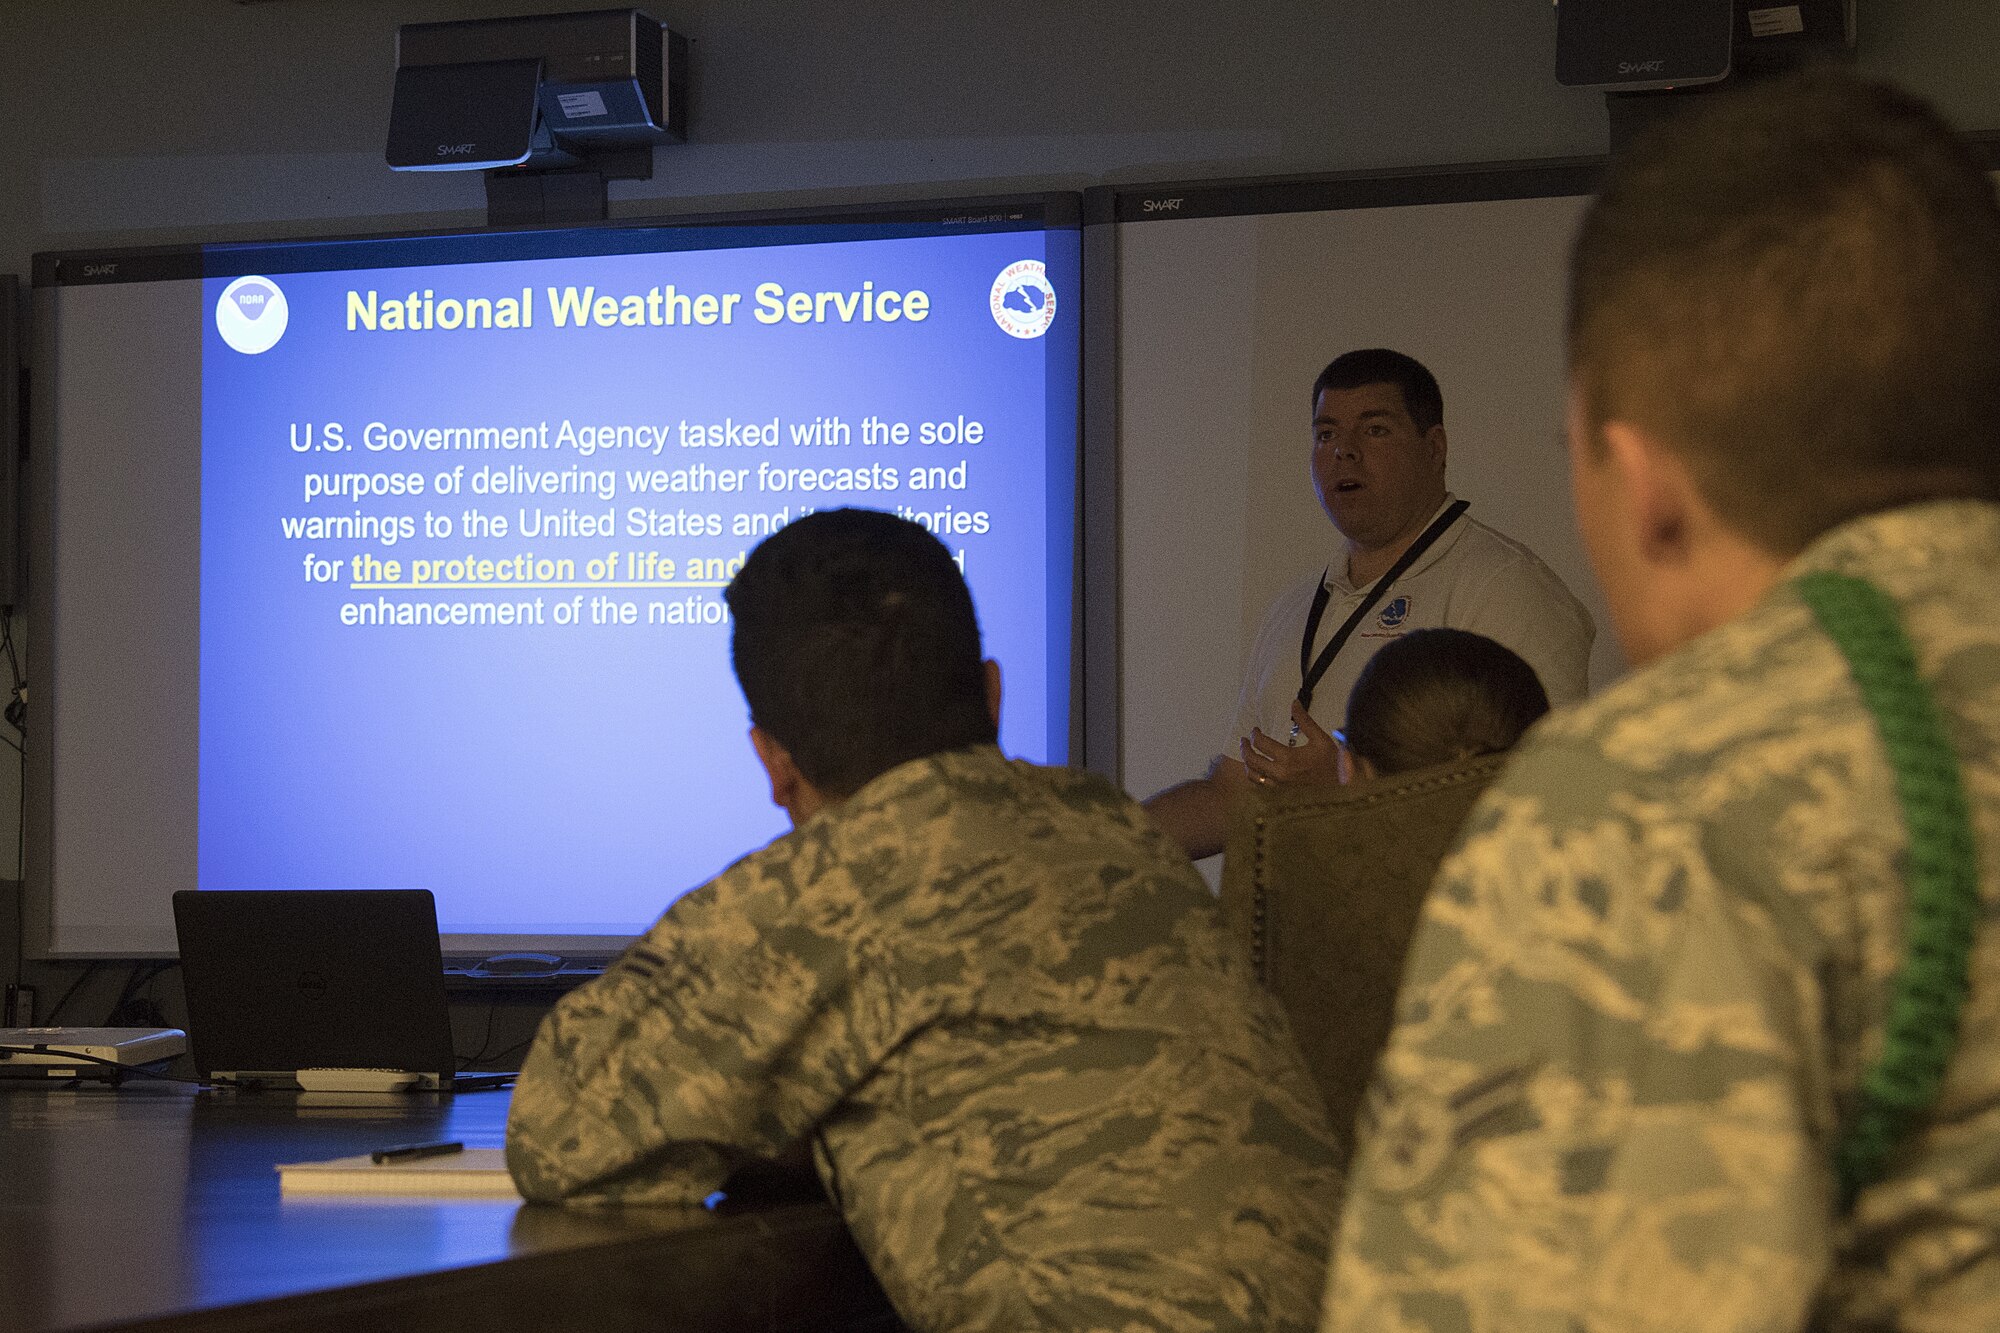 Keesler 335th Training Squadron weather students listen to a SkyWarn Program briefing by Phil Grigsby, National Weather Service forecaster, inside the Weather Training Complex at Keesler Air Force Base, Mississippi, Nov. 2, 2018. The program is a partnership between the National Weather Service and the 81st Training Wing, which certifies the weather students to be official storm spotters. (U.S. Air Force photo by Airman 1st Class Suzie Plotnikov)